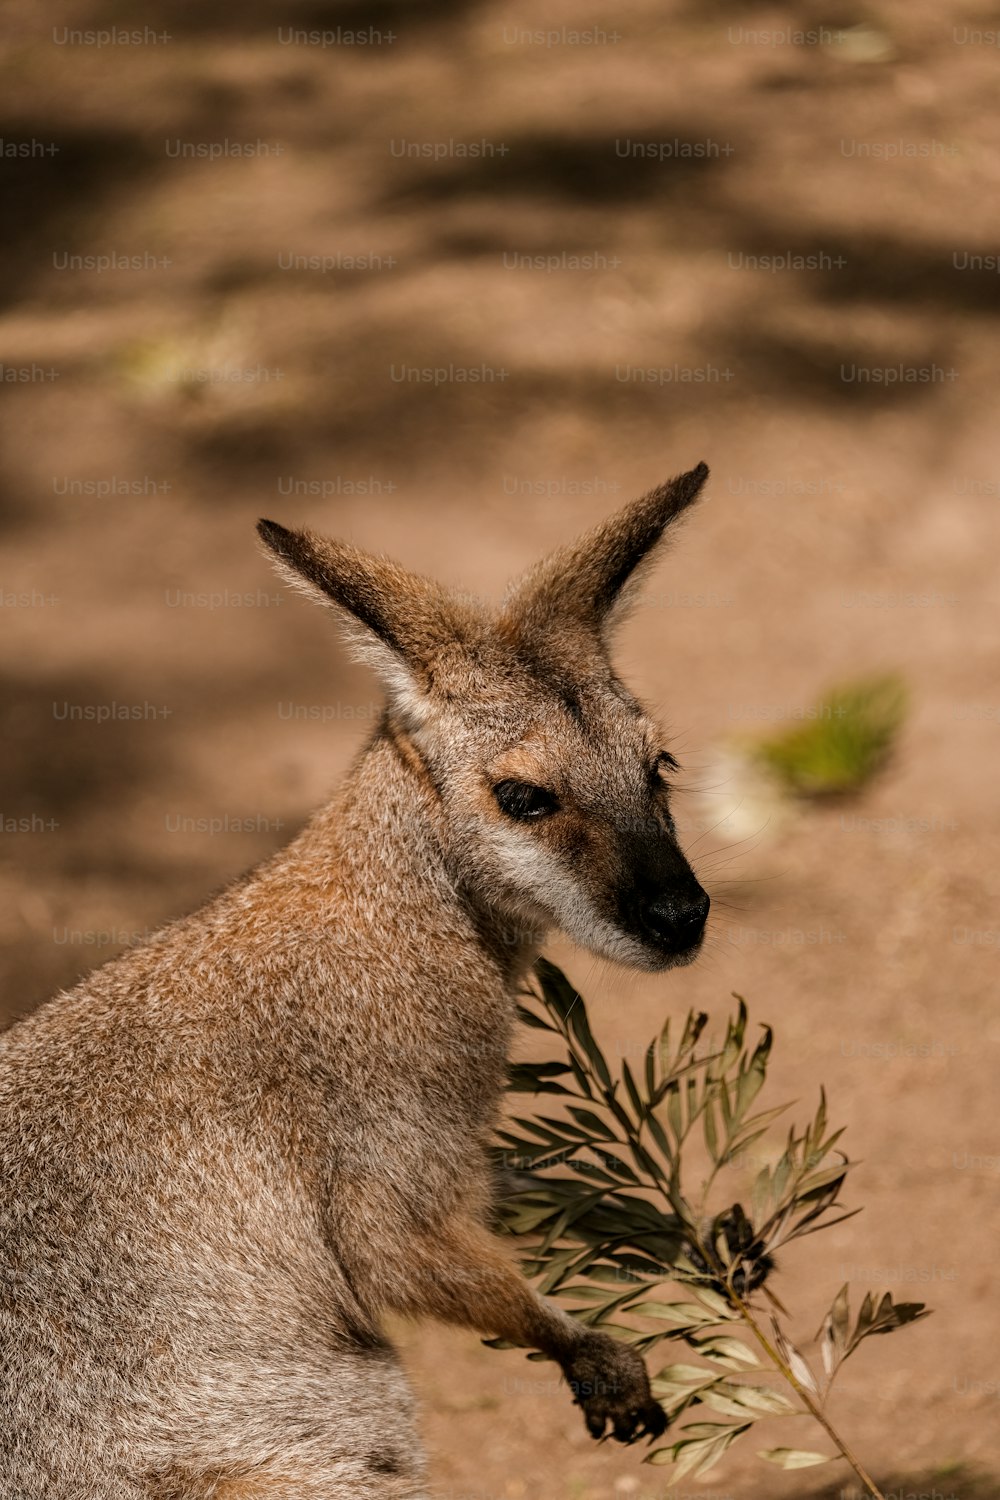 a close up of a kangaroo with a plant in its mouth